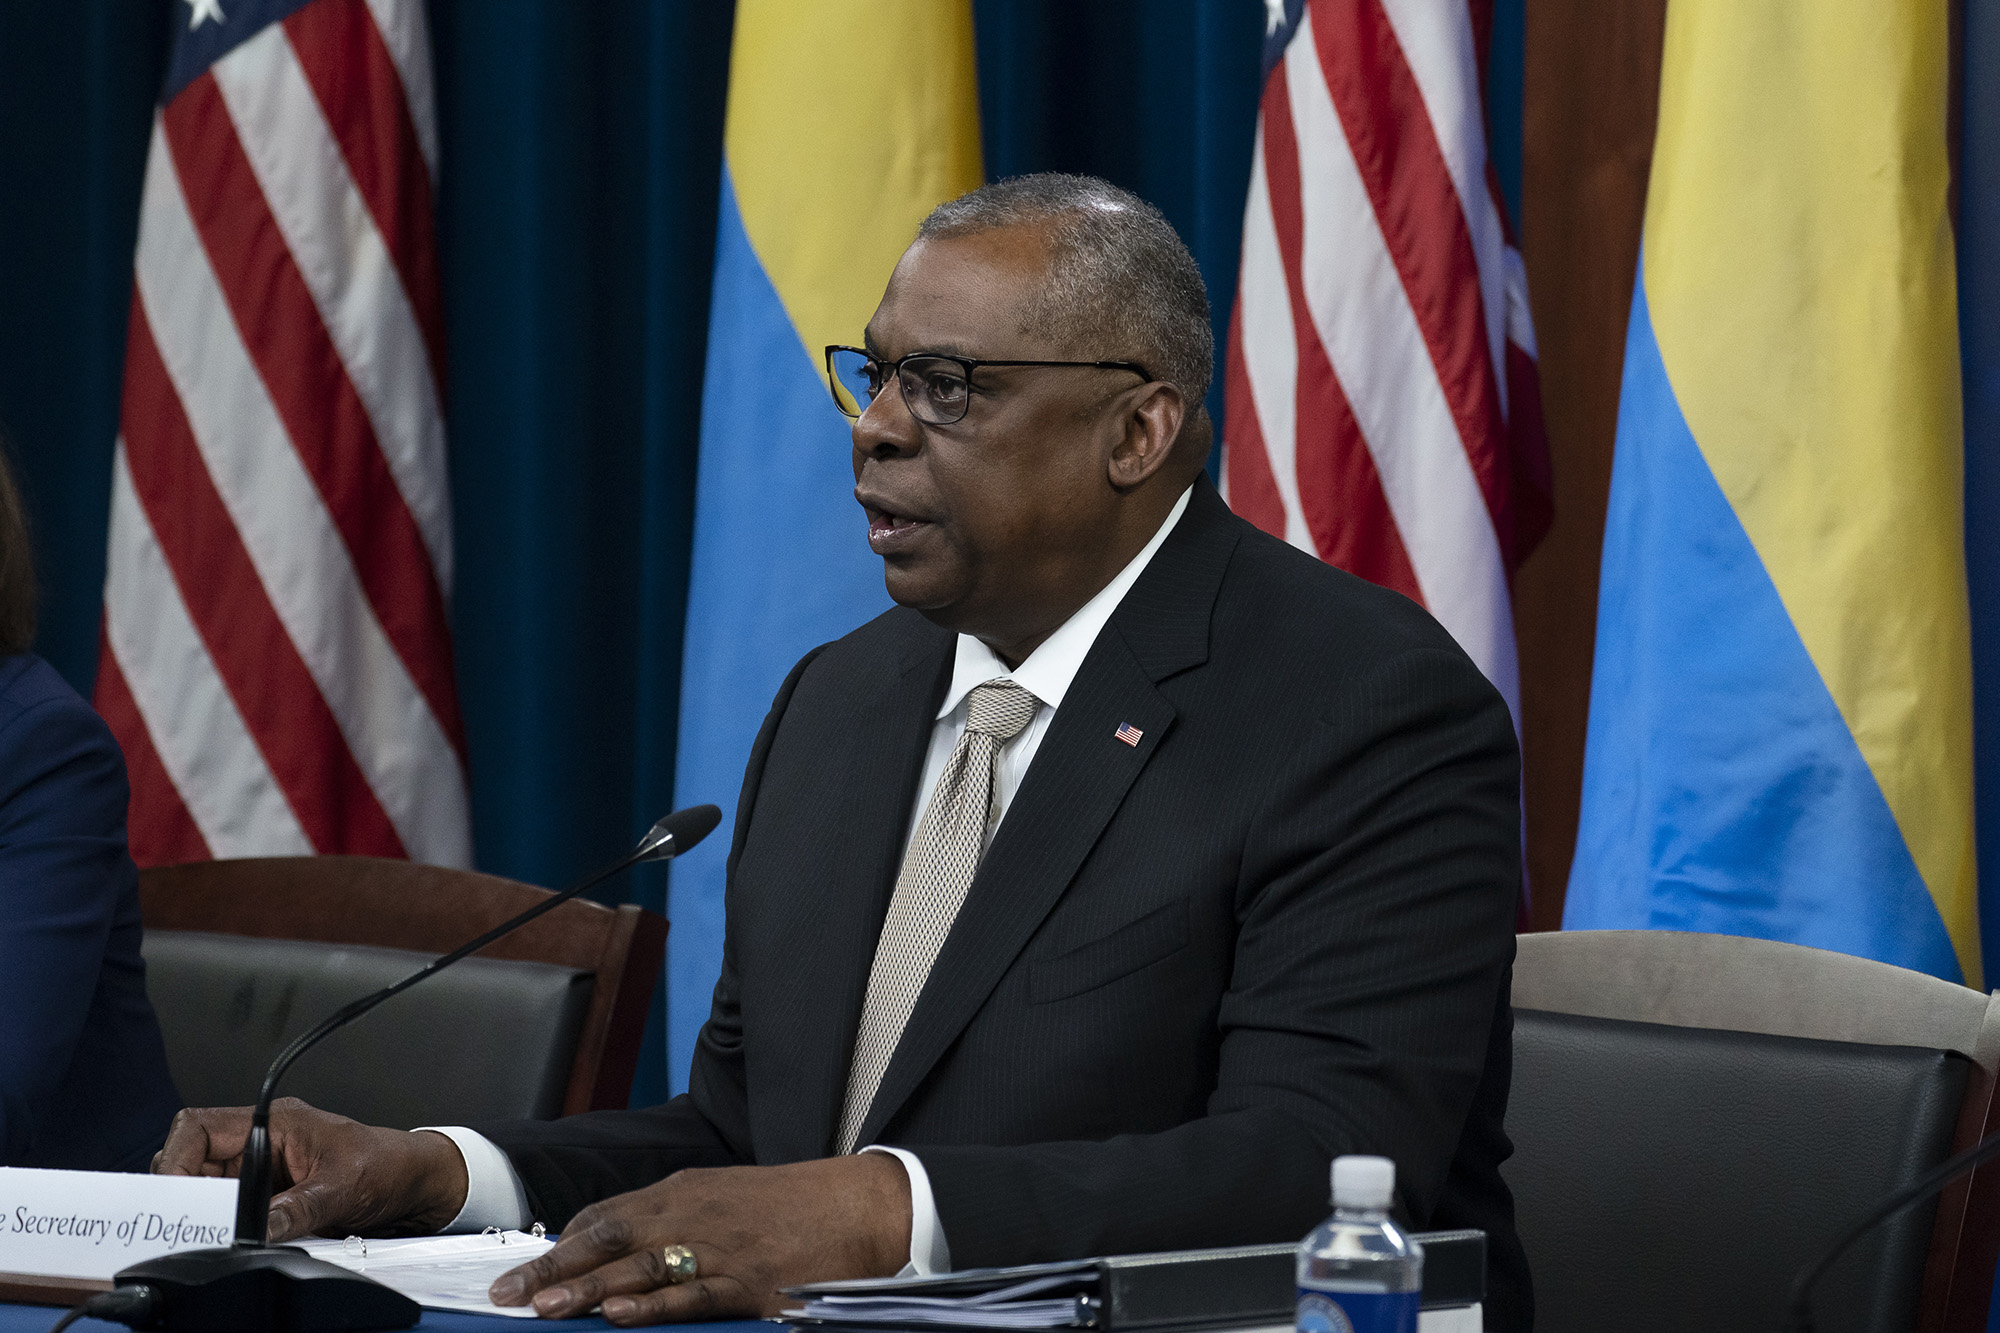 Secretary of Defense Lloyd Austin gives opening remarks at a virtual meeting of the Ukraine Defense Contact Group at the Pentagon, Washington DC, on May 23.